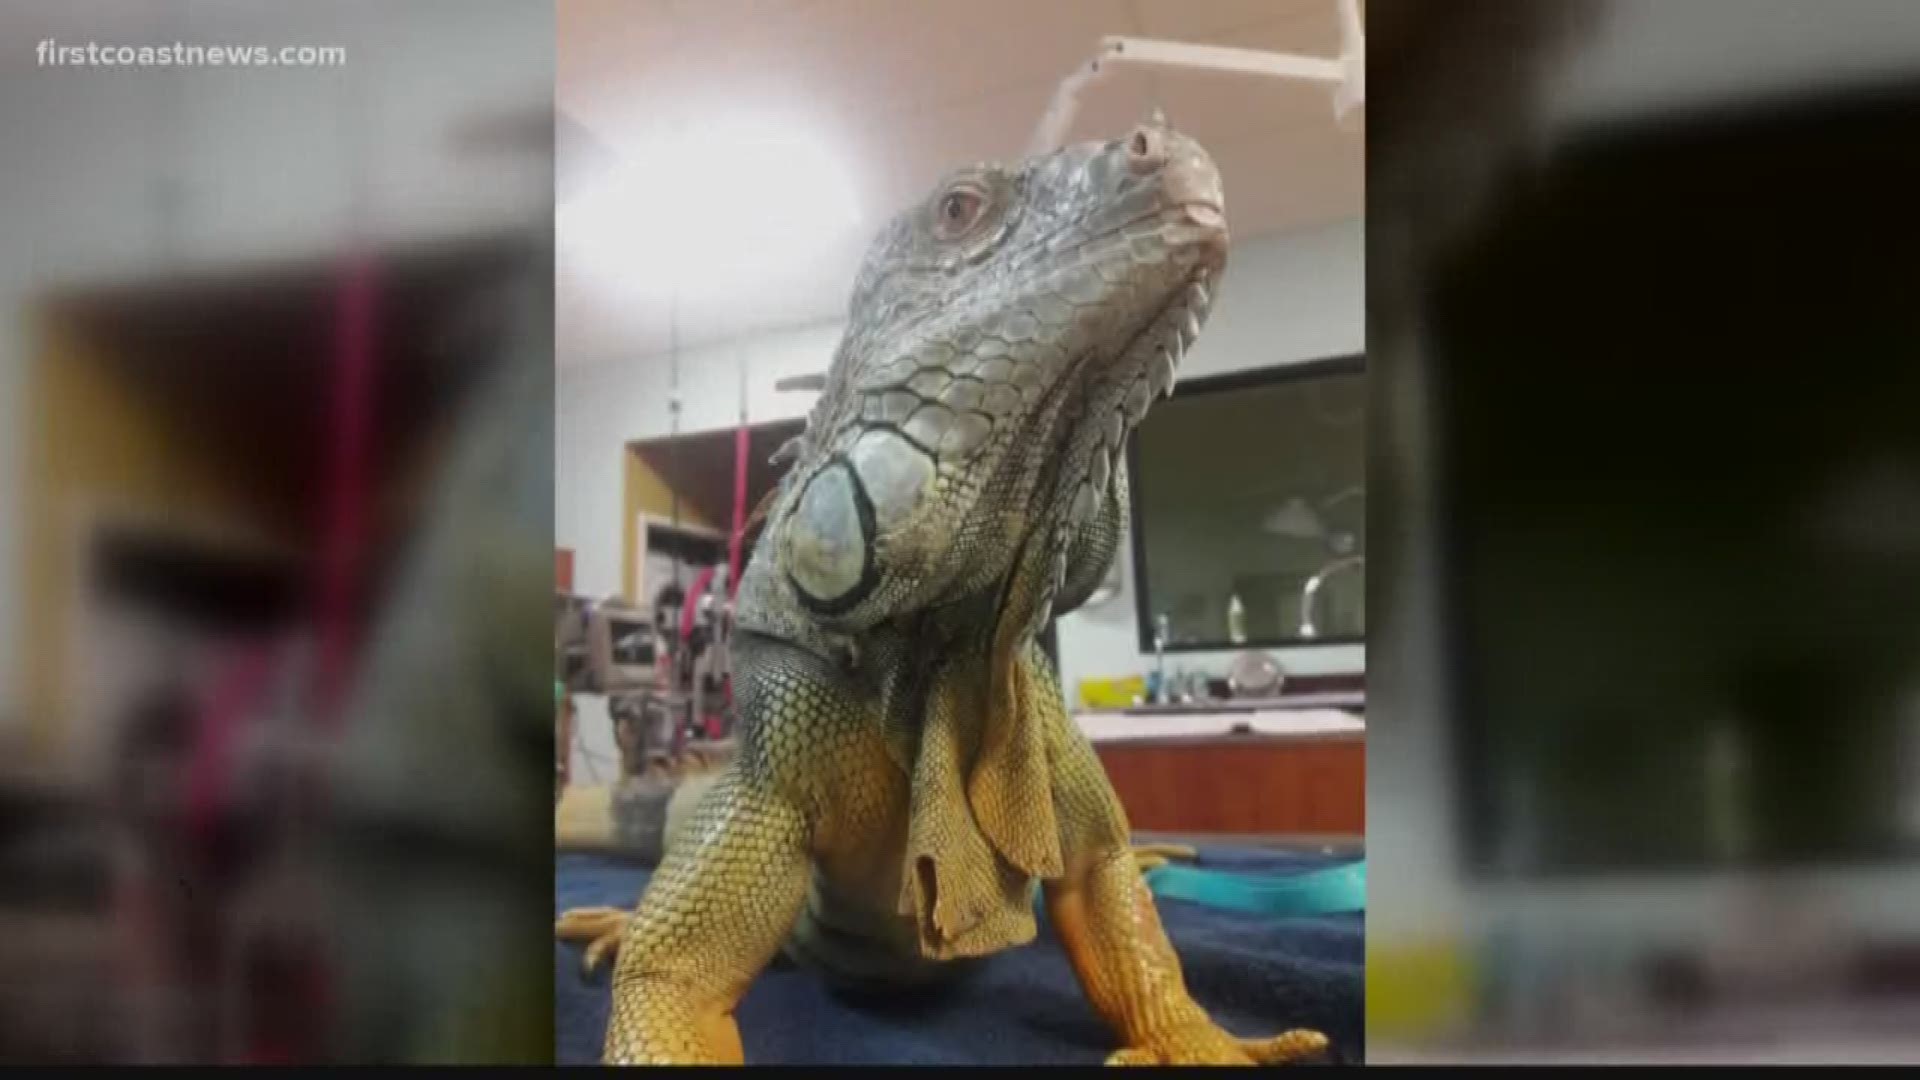 A few months ago, Mr. Deeds escaped from his outside enclosure in Riverside. His owner said she's been trying to rescue him since then.